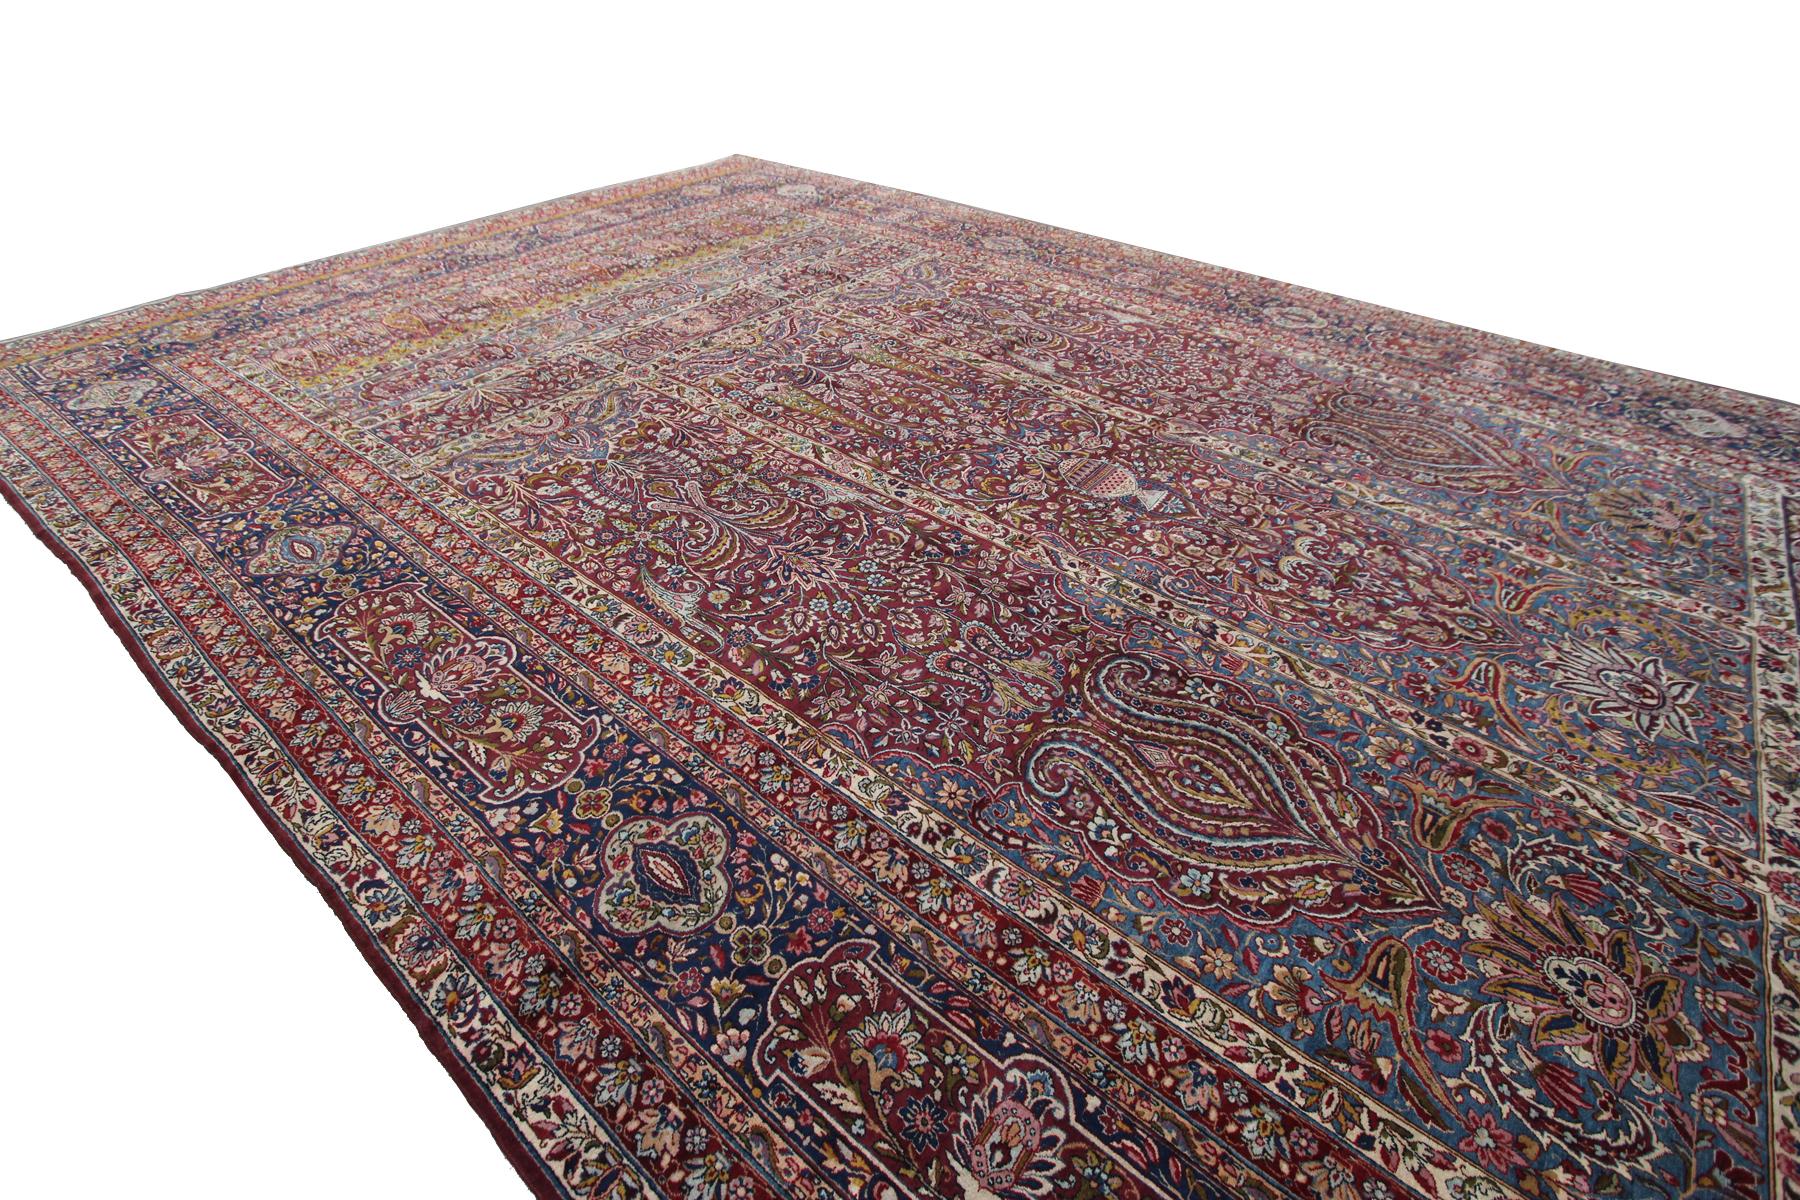 Oversized Antique Persian Rug Kermanshah Rug Lavar Rug Kork Palace 1890 In Good Condition For Sale In New York, NY